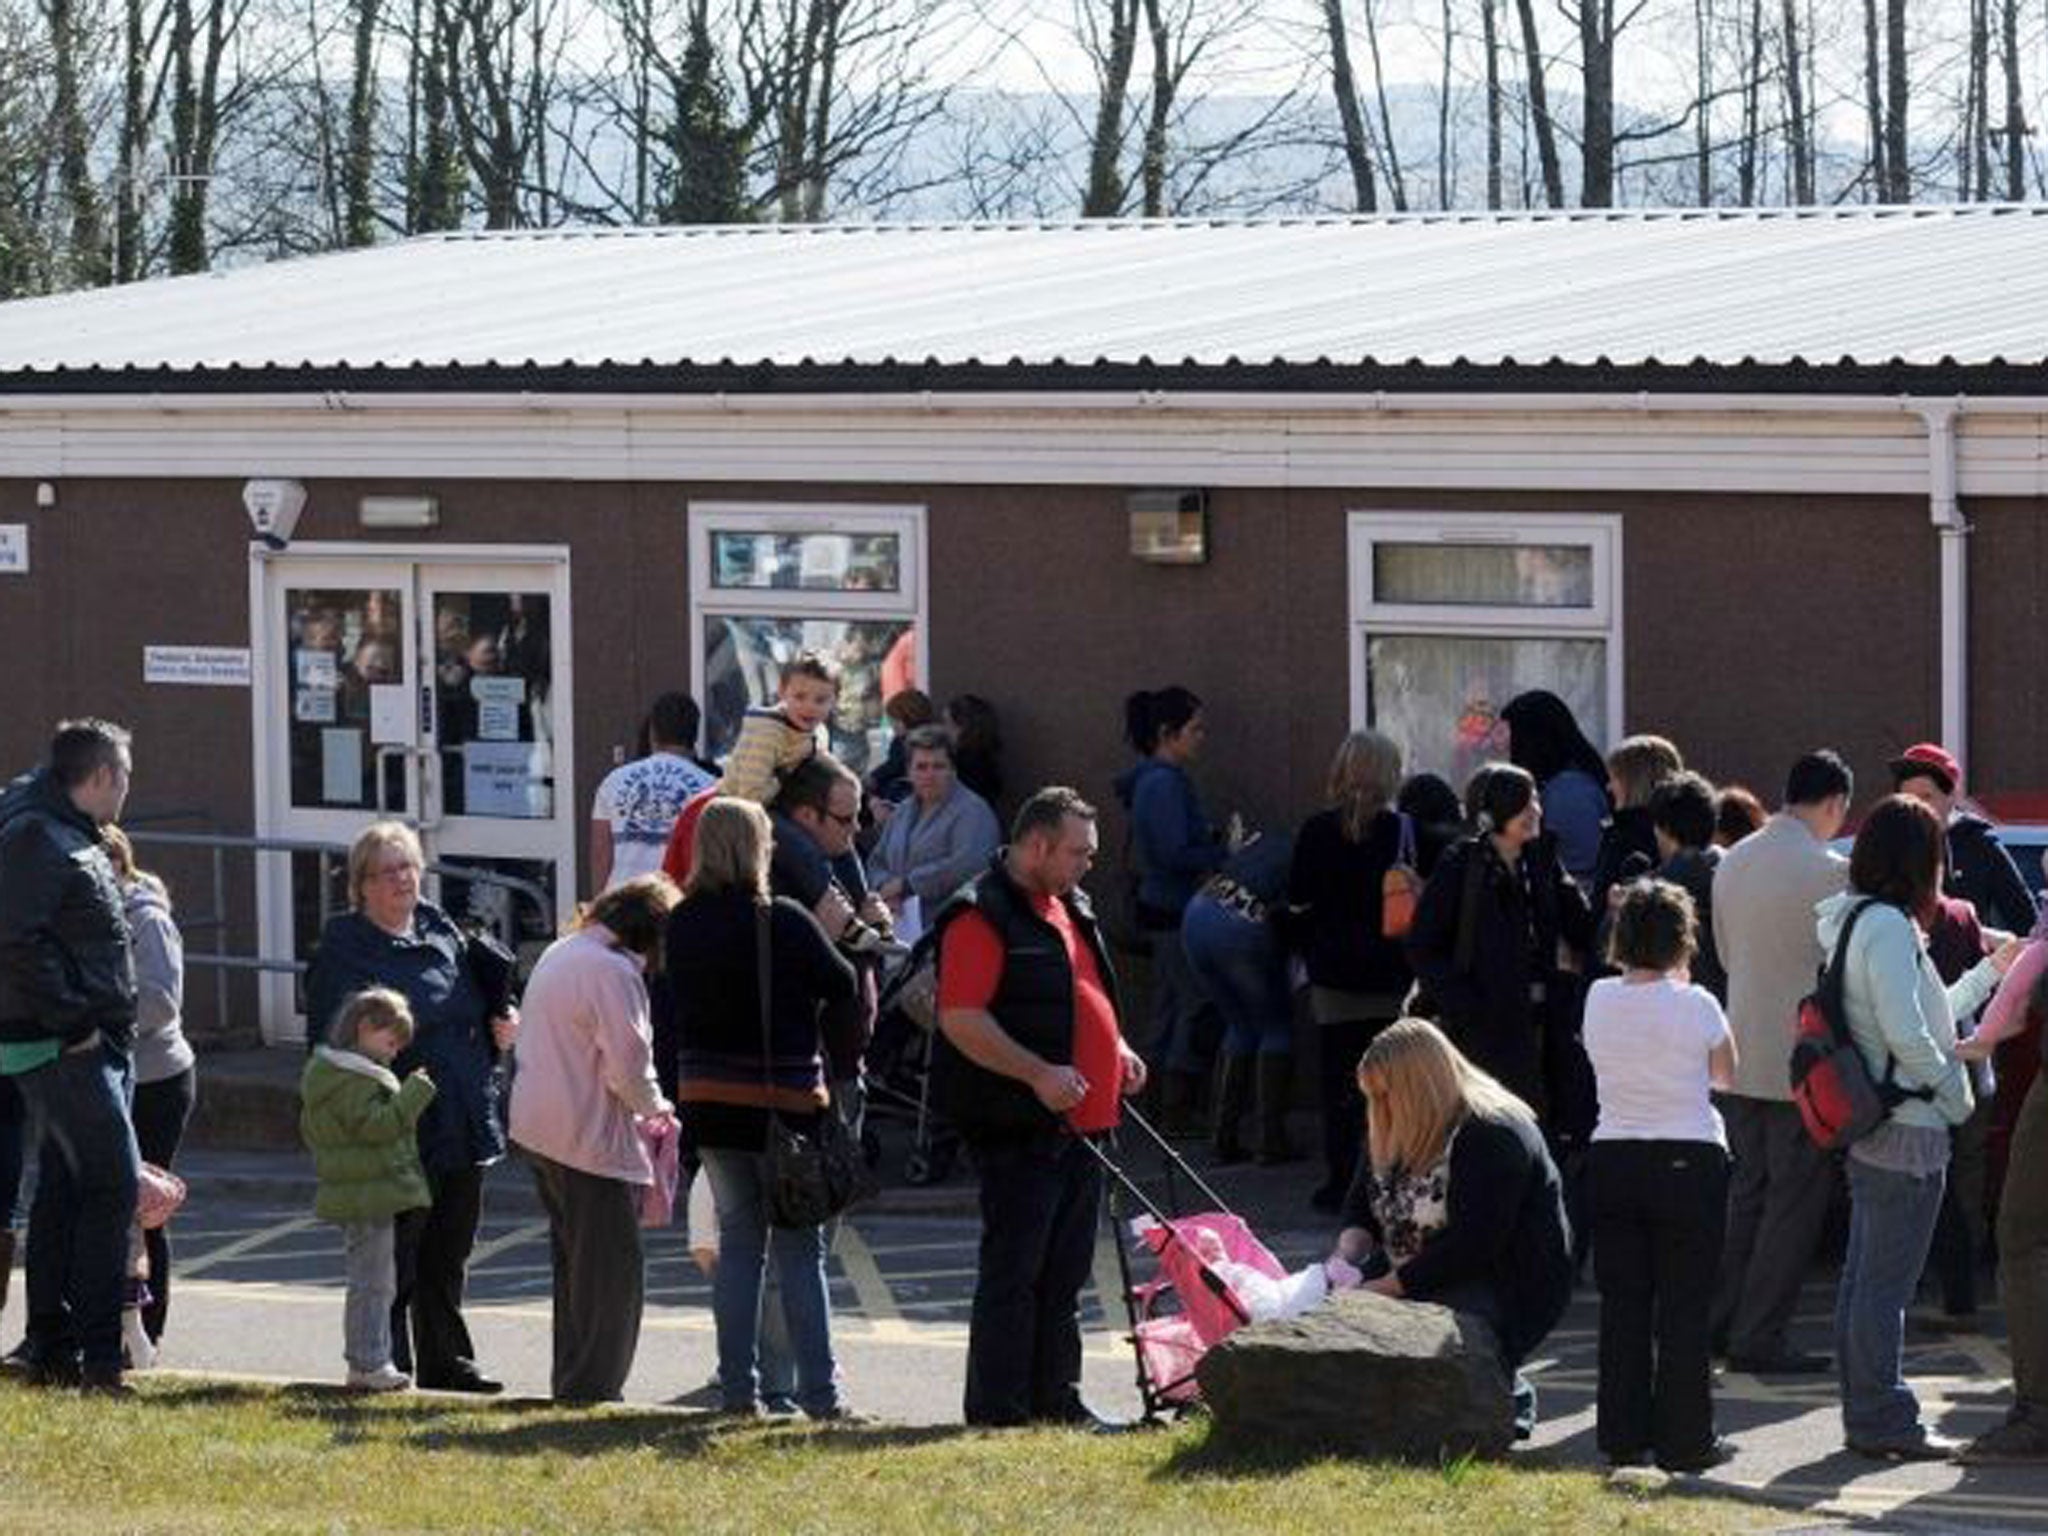 Parents and children queue outside the Paediatric Outpatient department at Morriston Hospital in Swansea